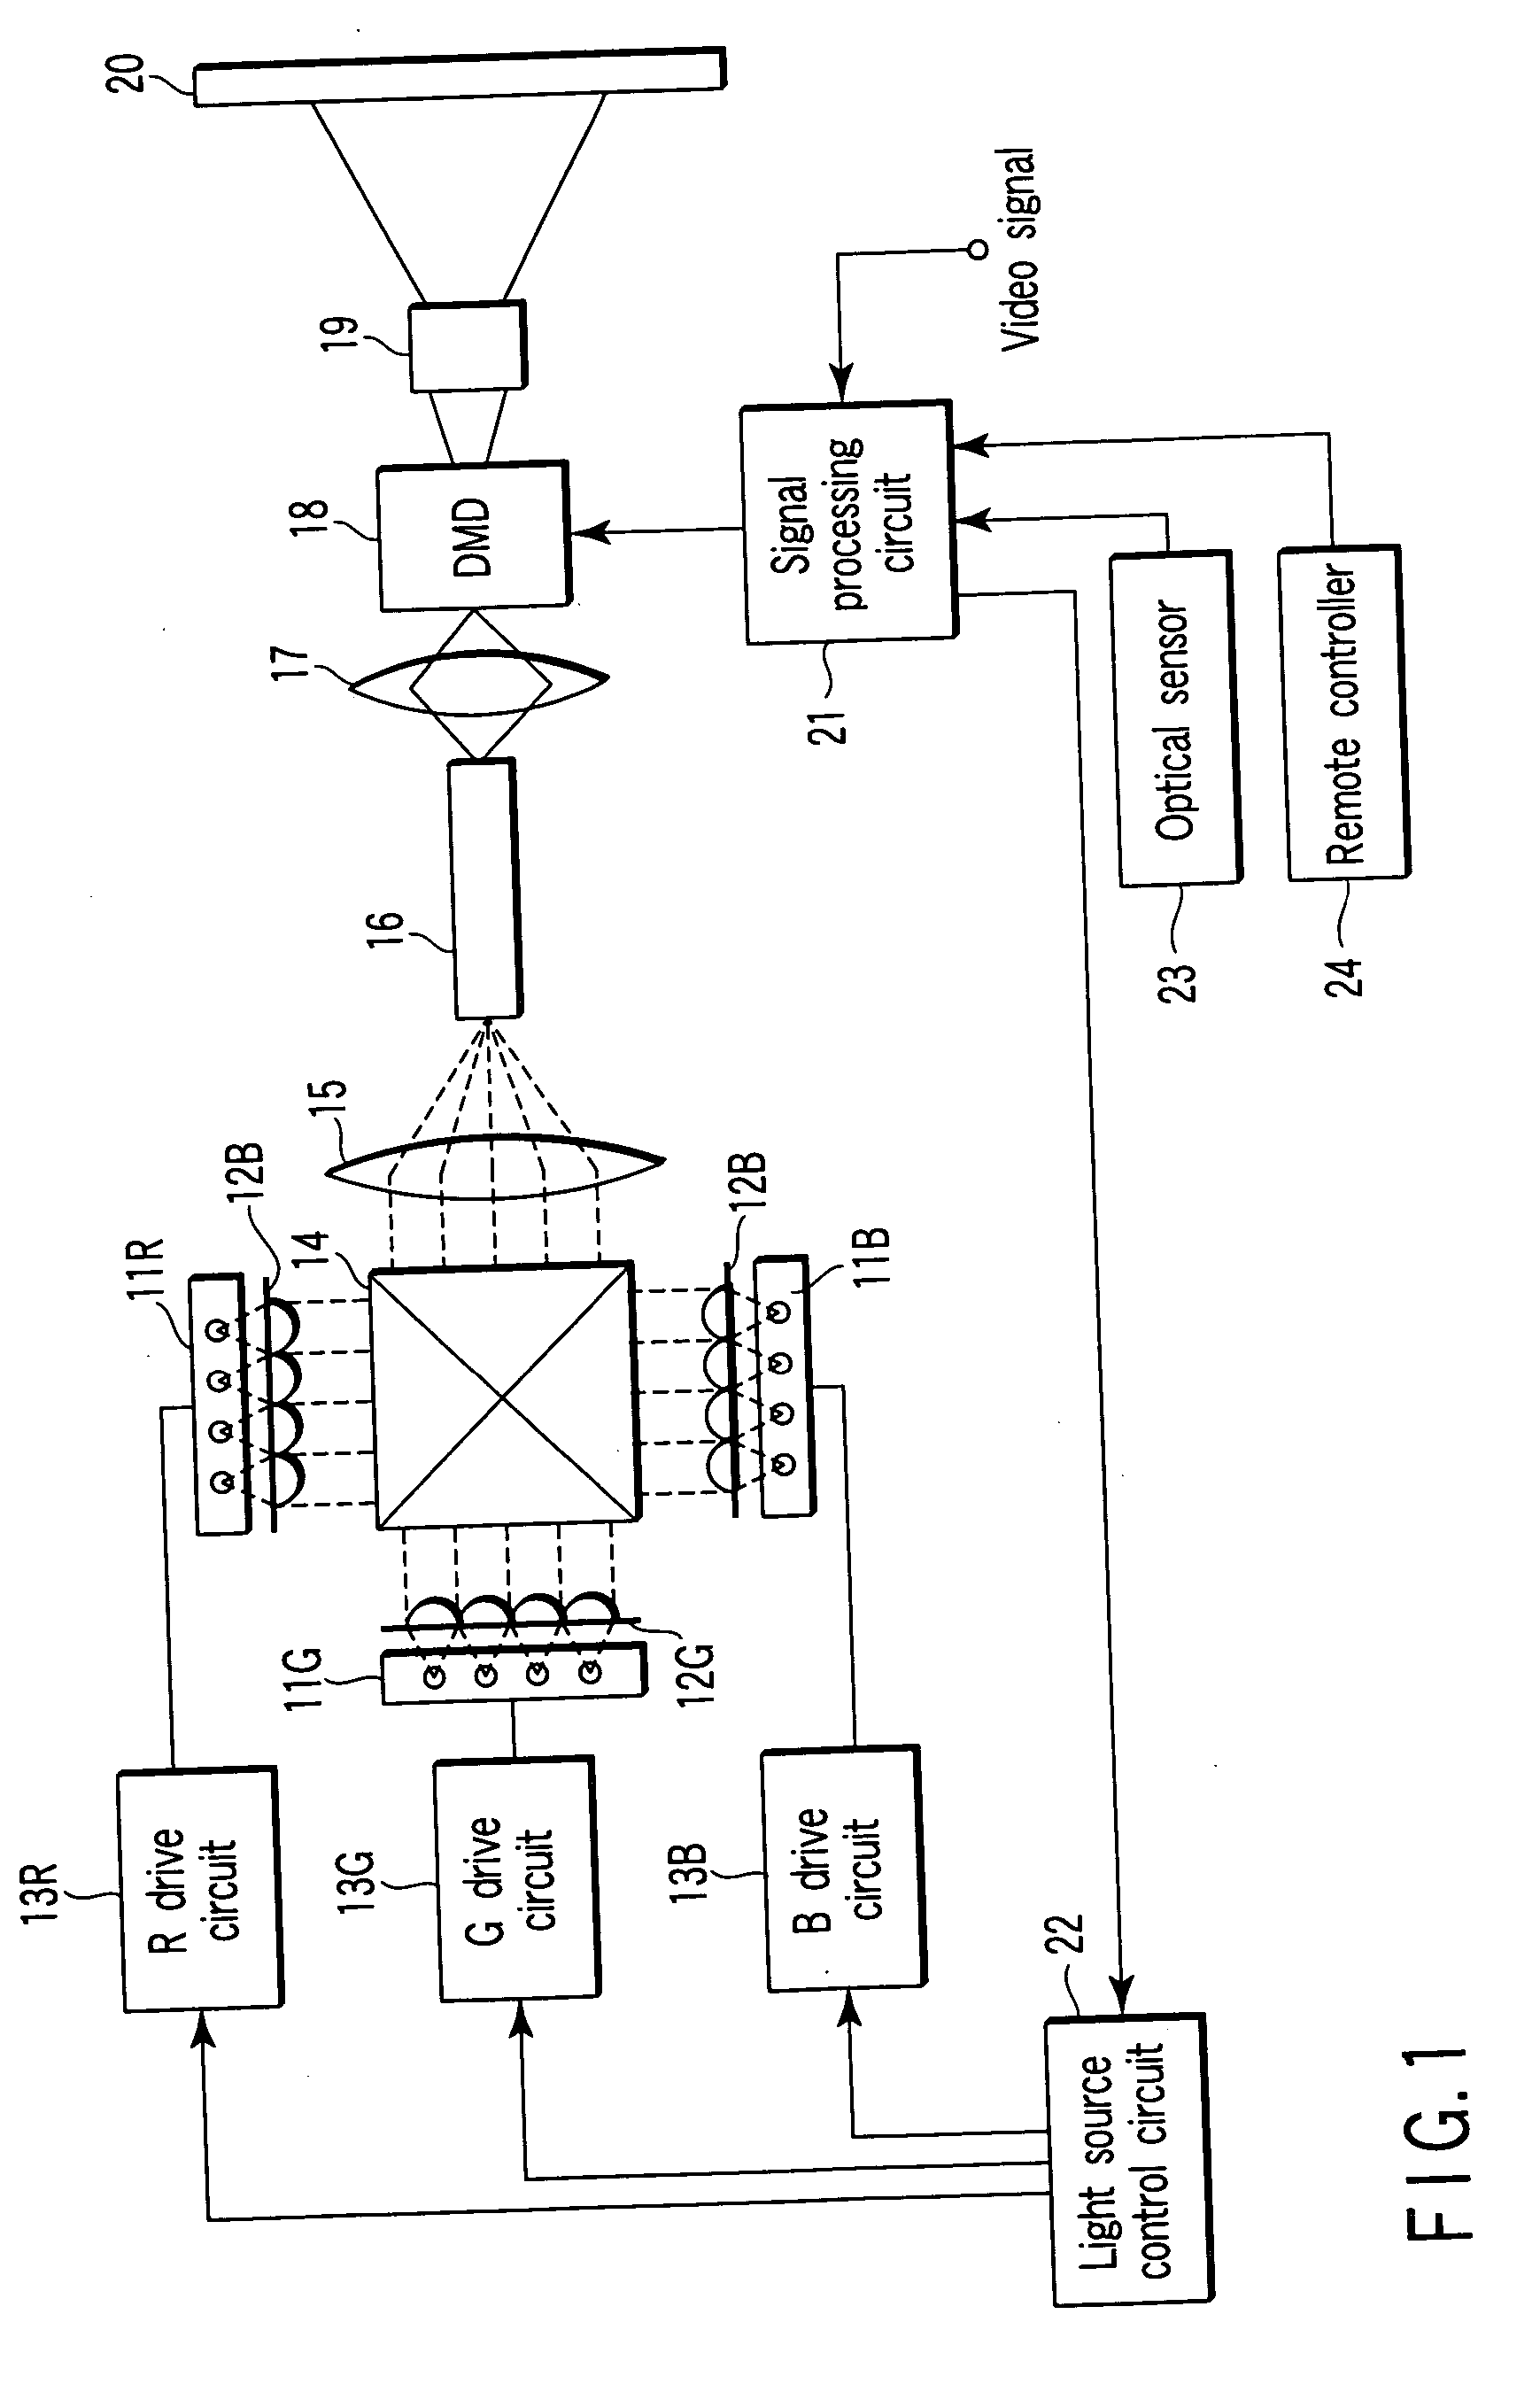 Projection video display apparatus and brightness adjustment method therefor